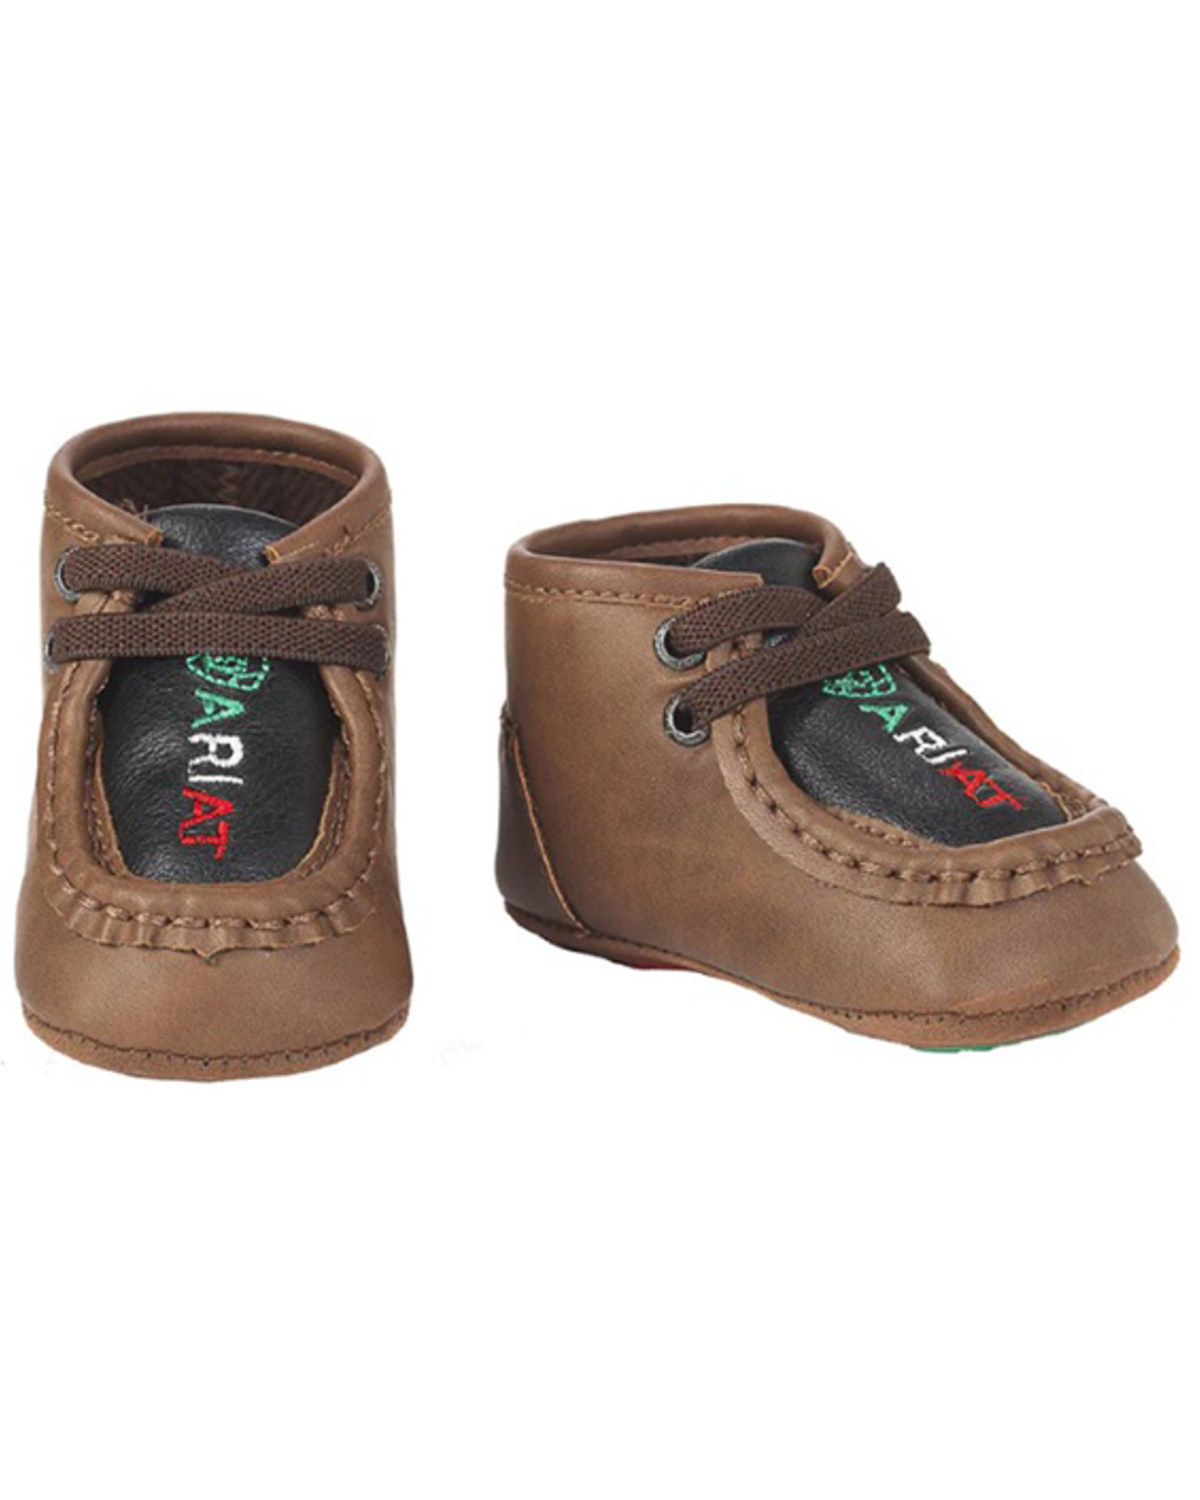 Ariat Infant-Boys' Lil Stomper Miguel Mexico Lace-Up Shoes